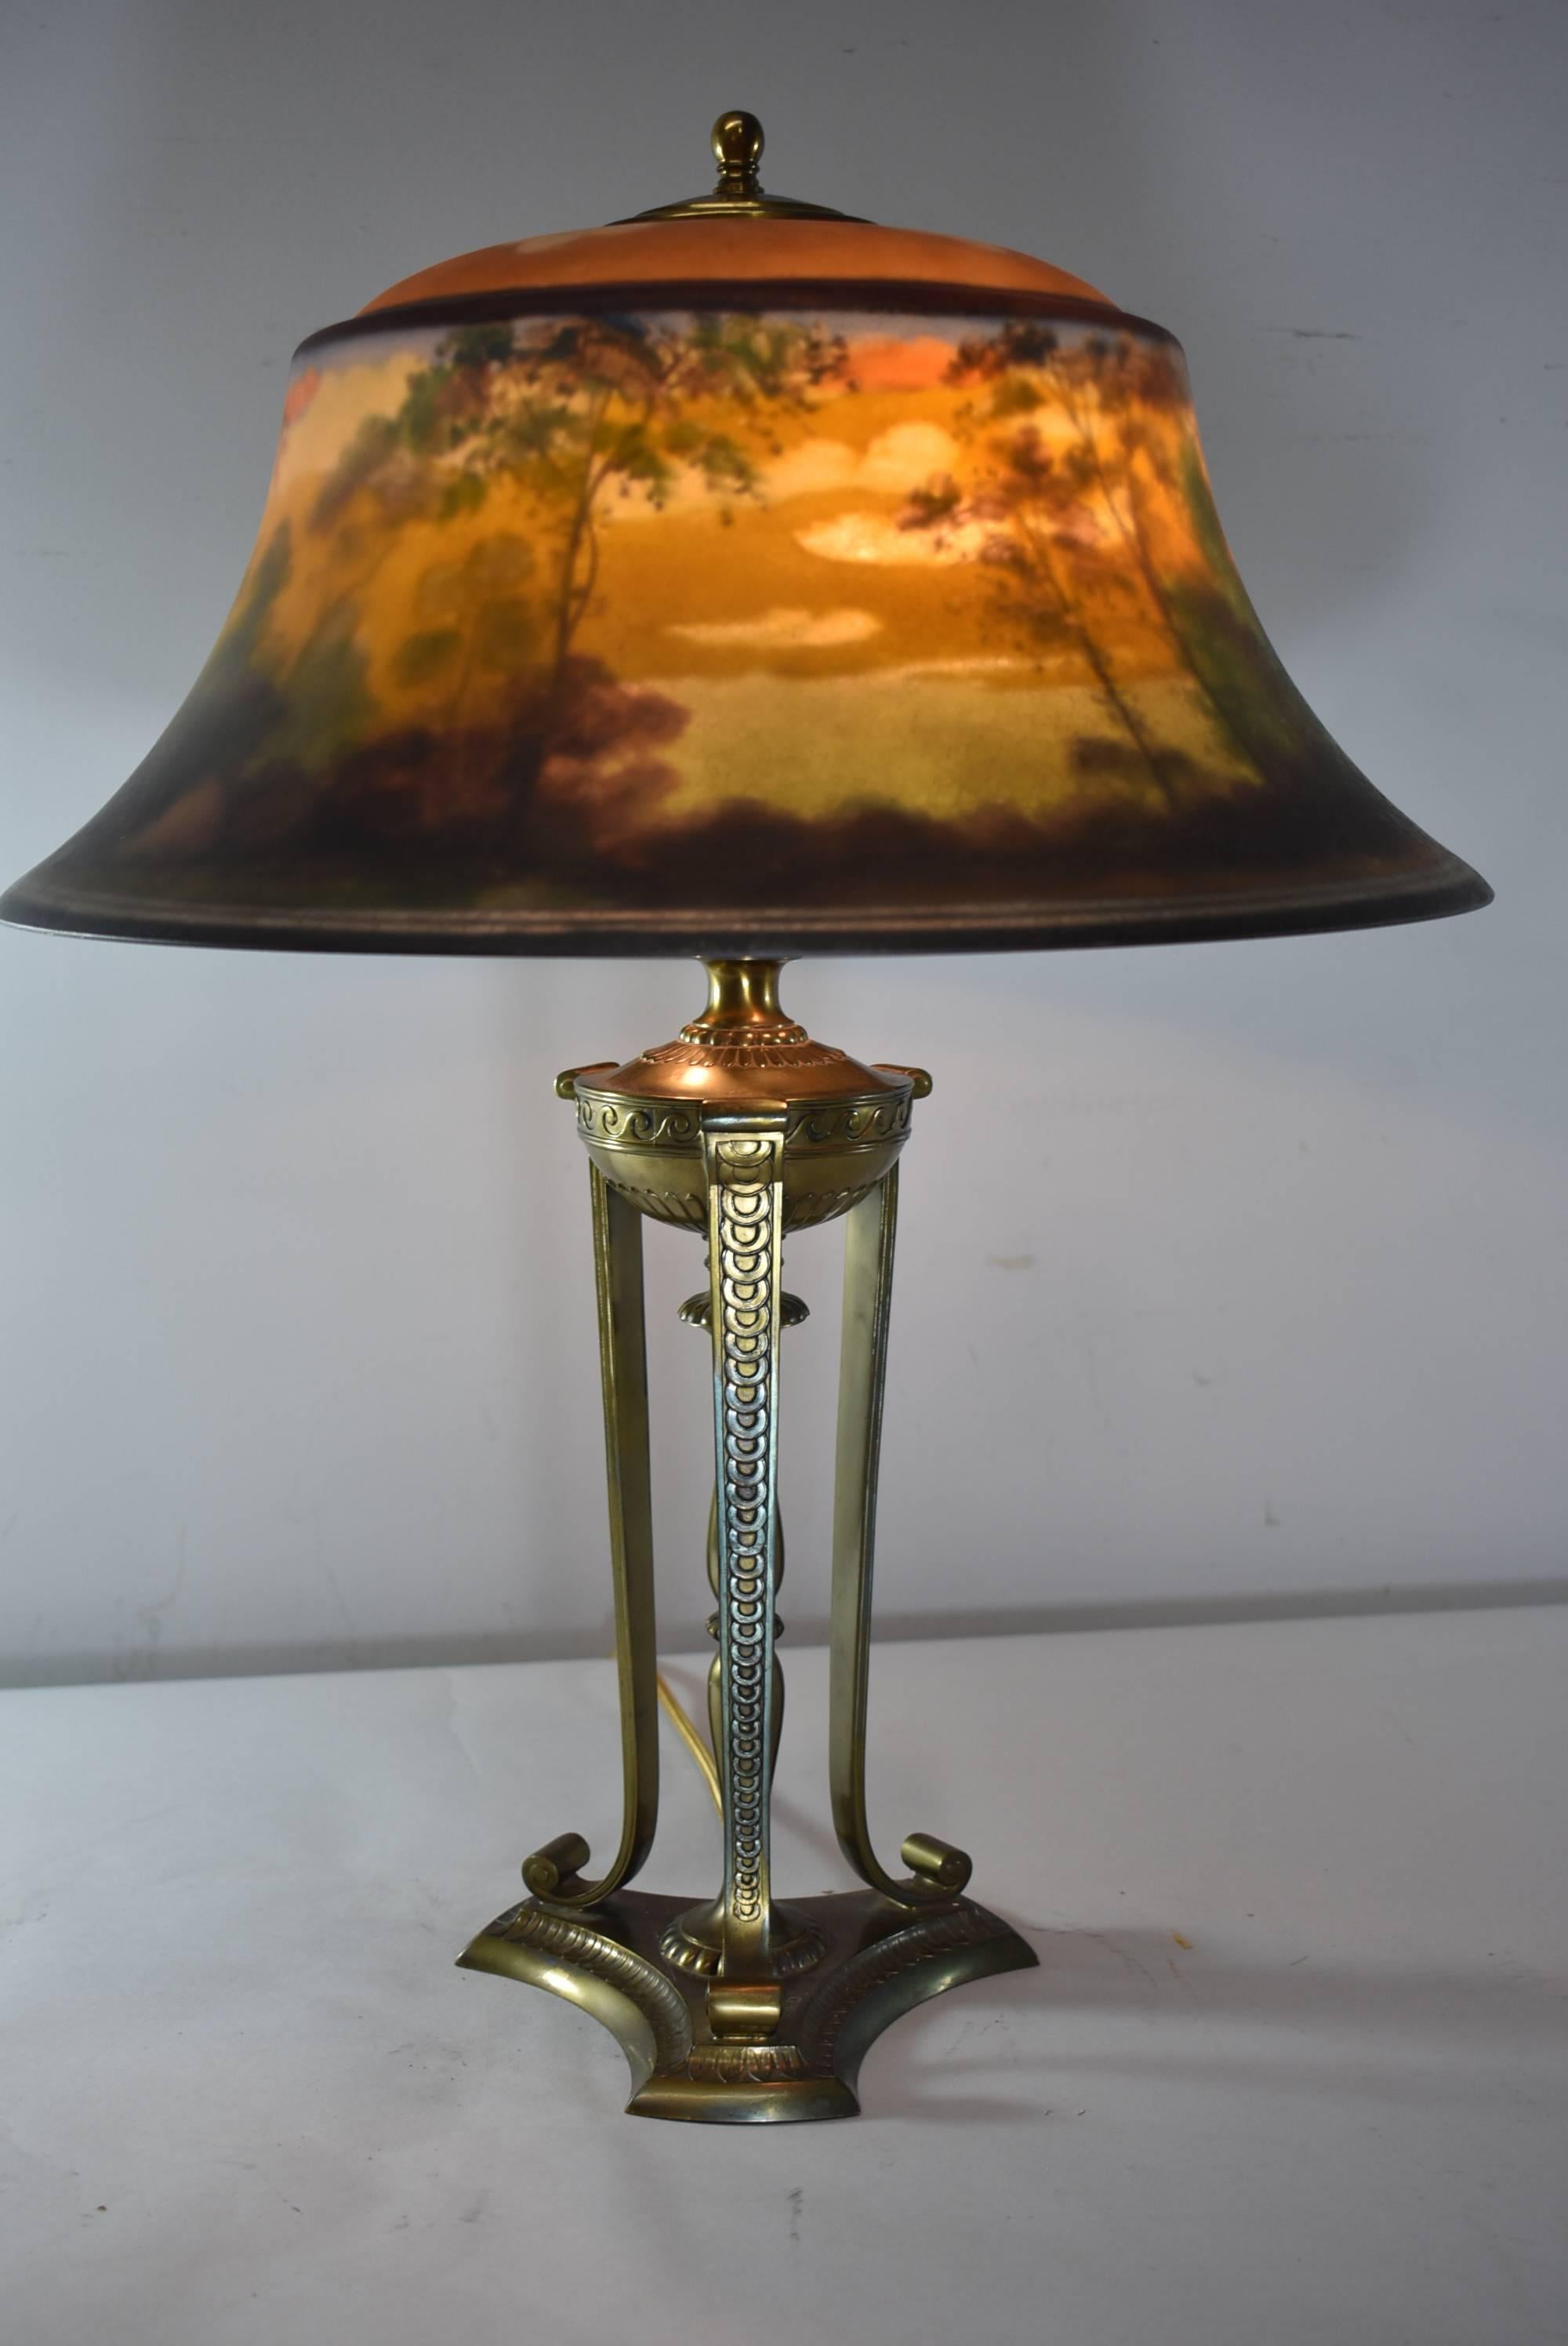 Pairpoint reverse painted table lamp #D307. Exeter shade signed L.H.Gorham. Beautifully depicted landscape. No chips or repairs to the shade. Base is original with a bronze tone finish. Lamp has been rewired.